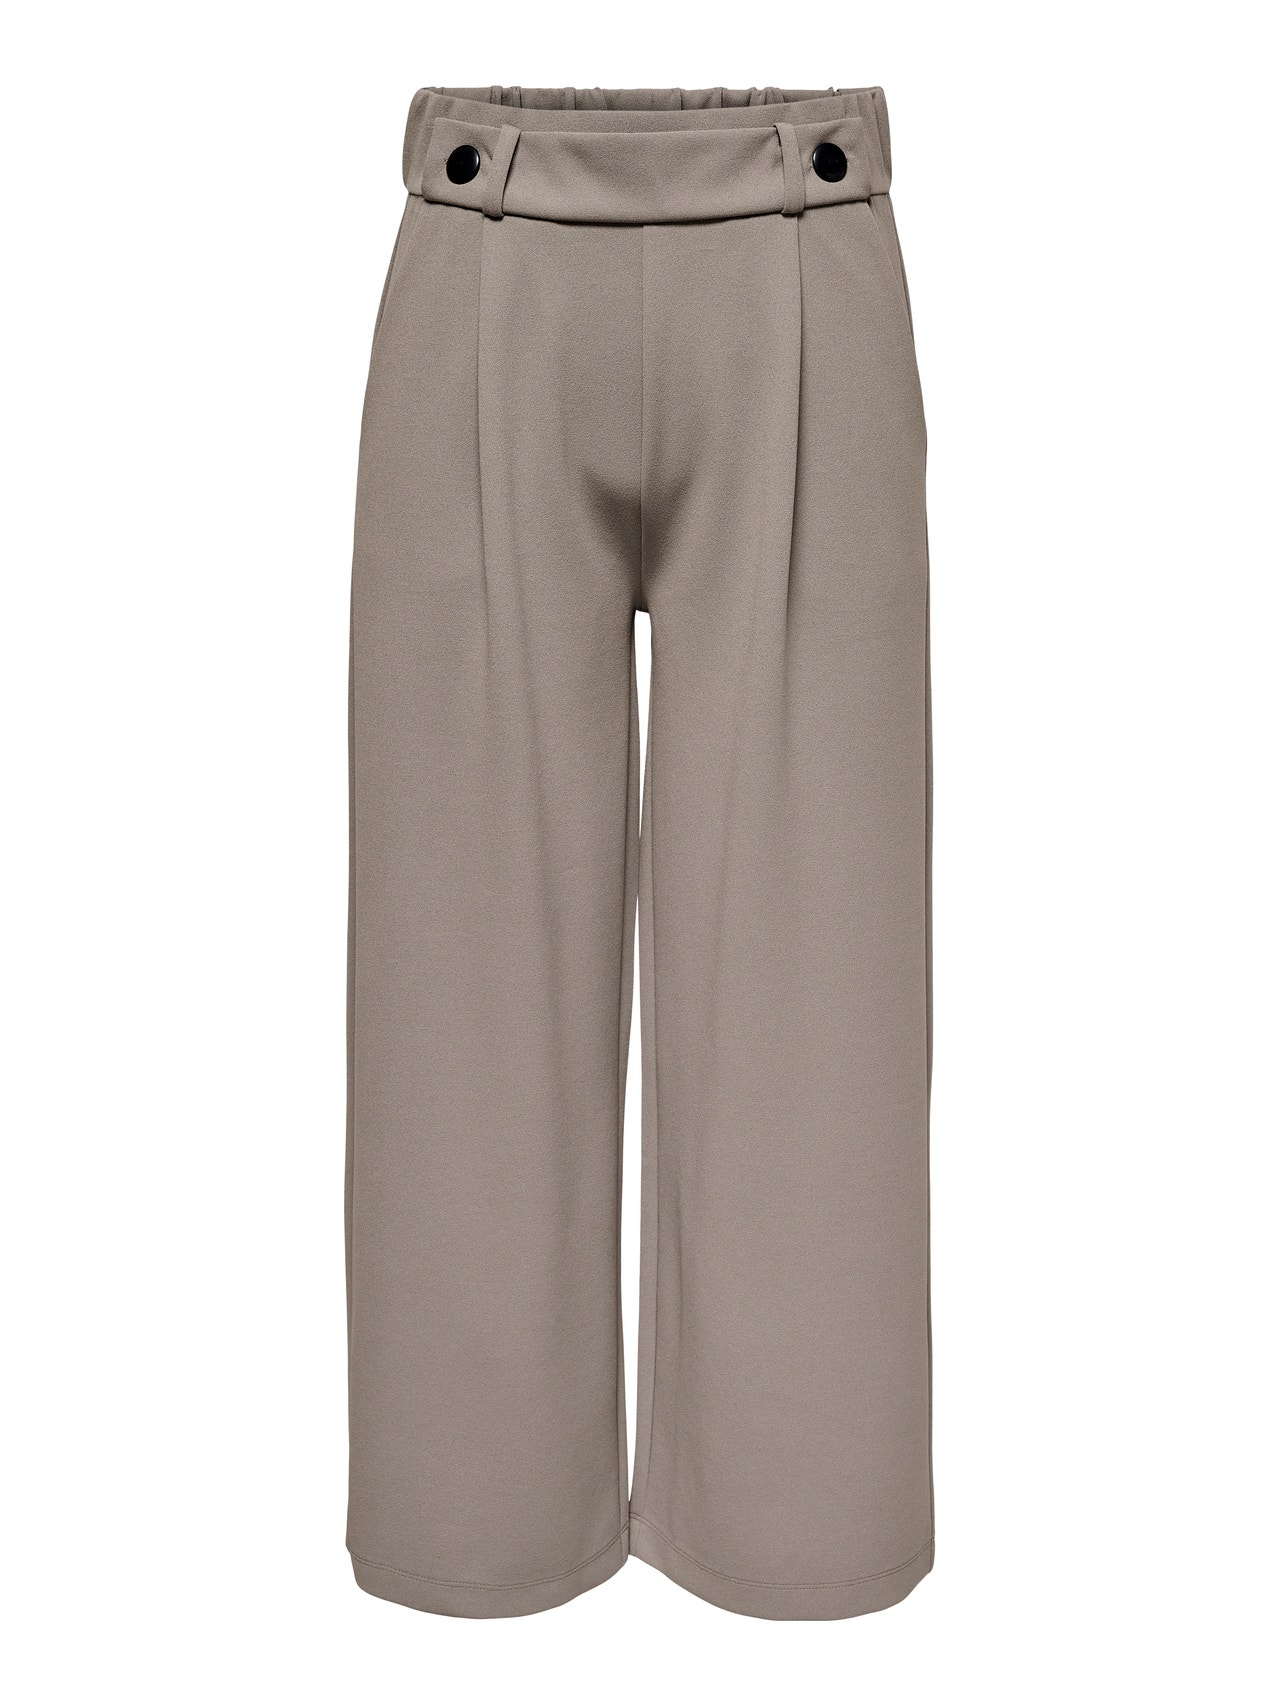 ONLY Wide legs ankle Trousers -Driftwood - 15208417